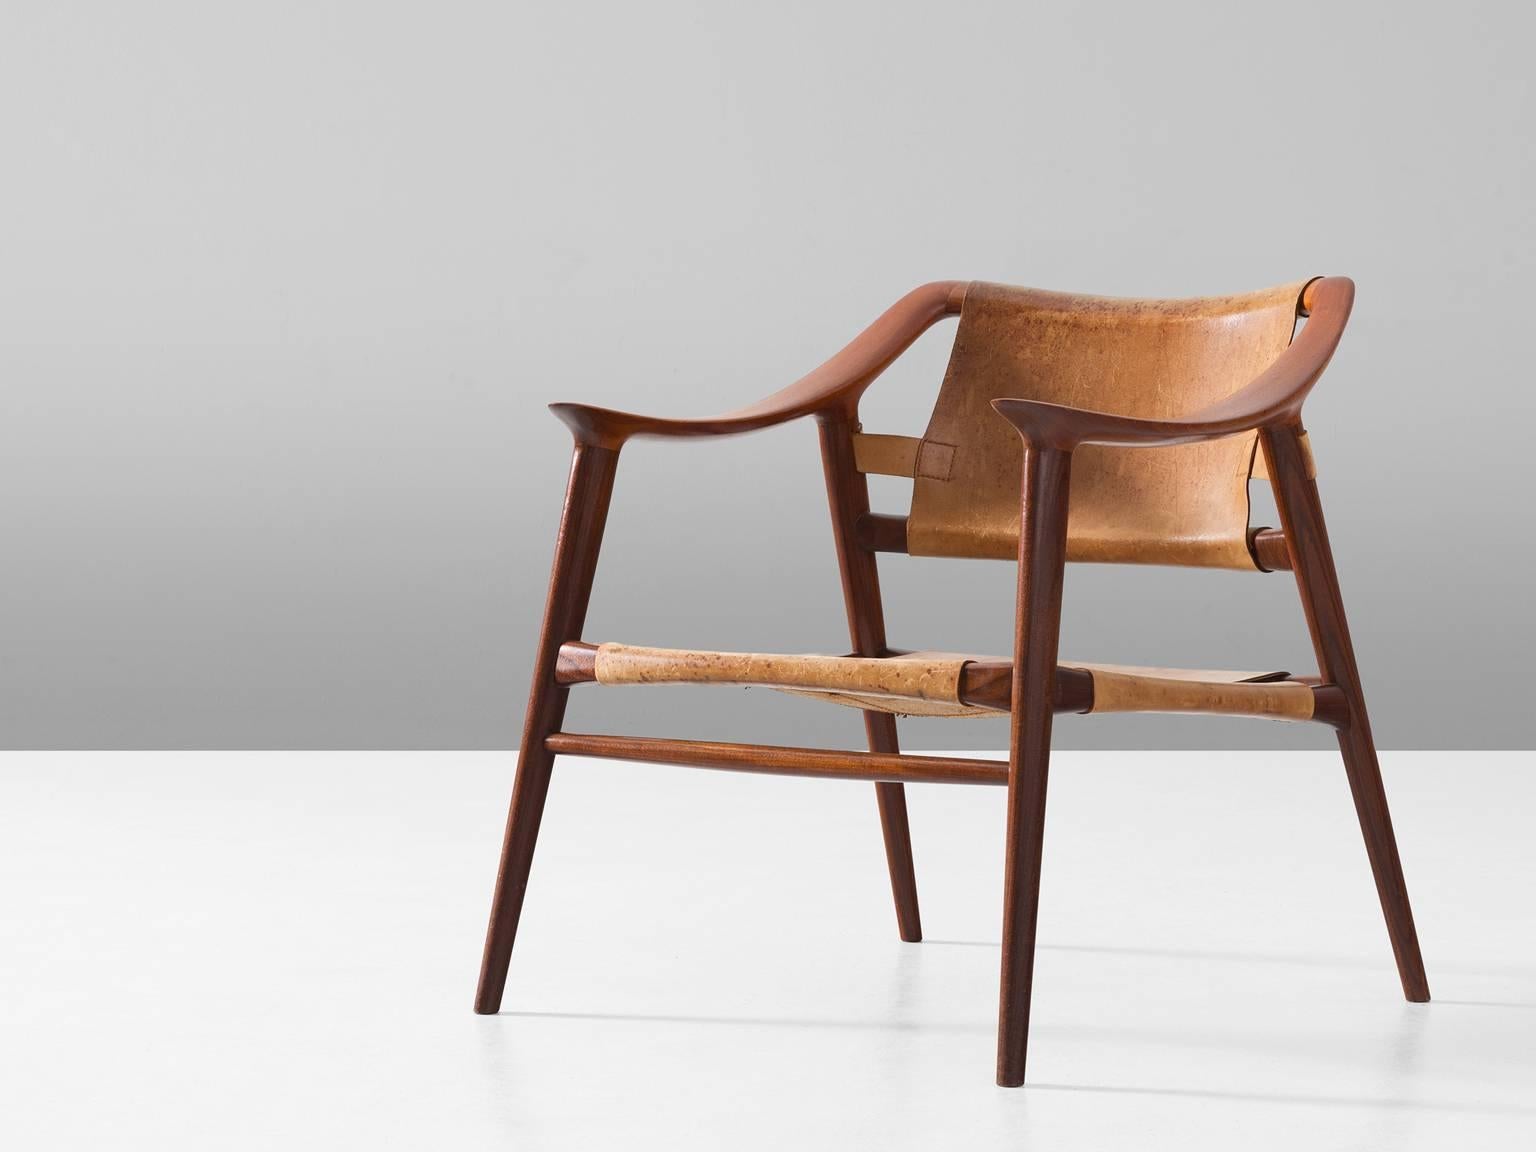 Armchair model 56/2 'Bambi', in teak and leather, by Rolf Rastad & Adolf Relling for Gustav Bahus, Norway, circa 1954. 

Excellent example of the 'Bambi' chair of Rolf Rastad and Adolf Reling. This edition consist of a teak frame and cognac